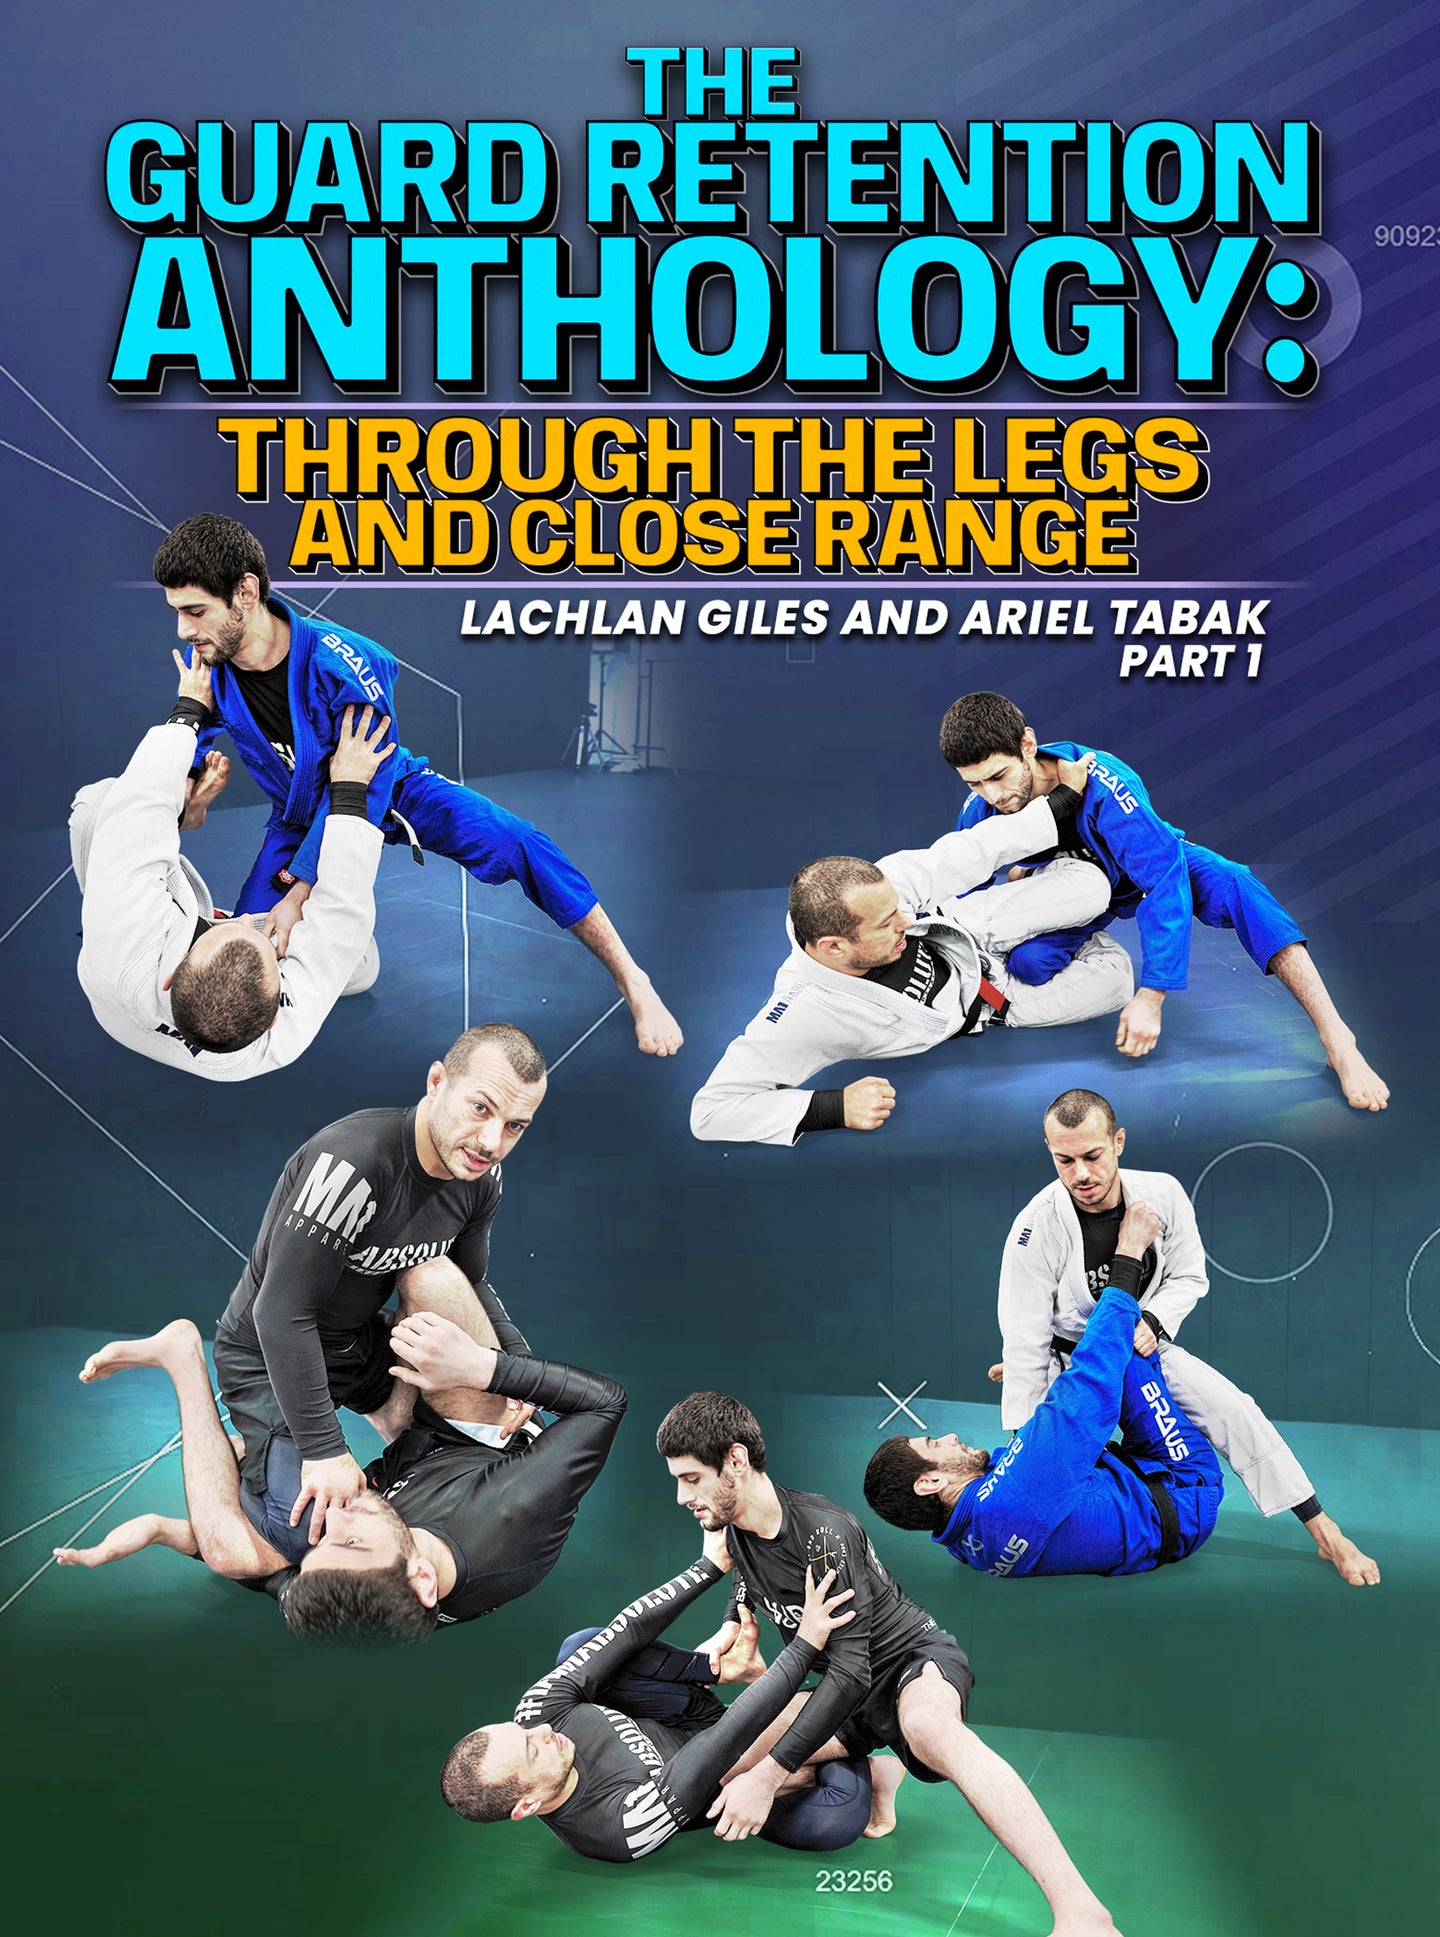 The Guard Retention Anthology: Through The Legs and Close Range by Lachlan Giles & Ariel Tabak - BJJ Fanatics